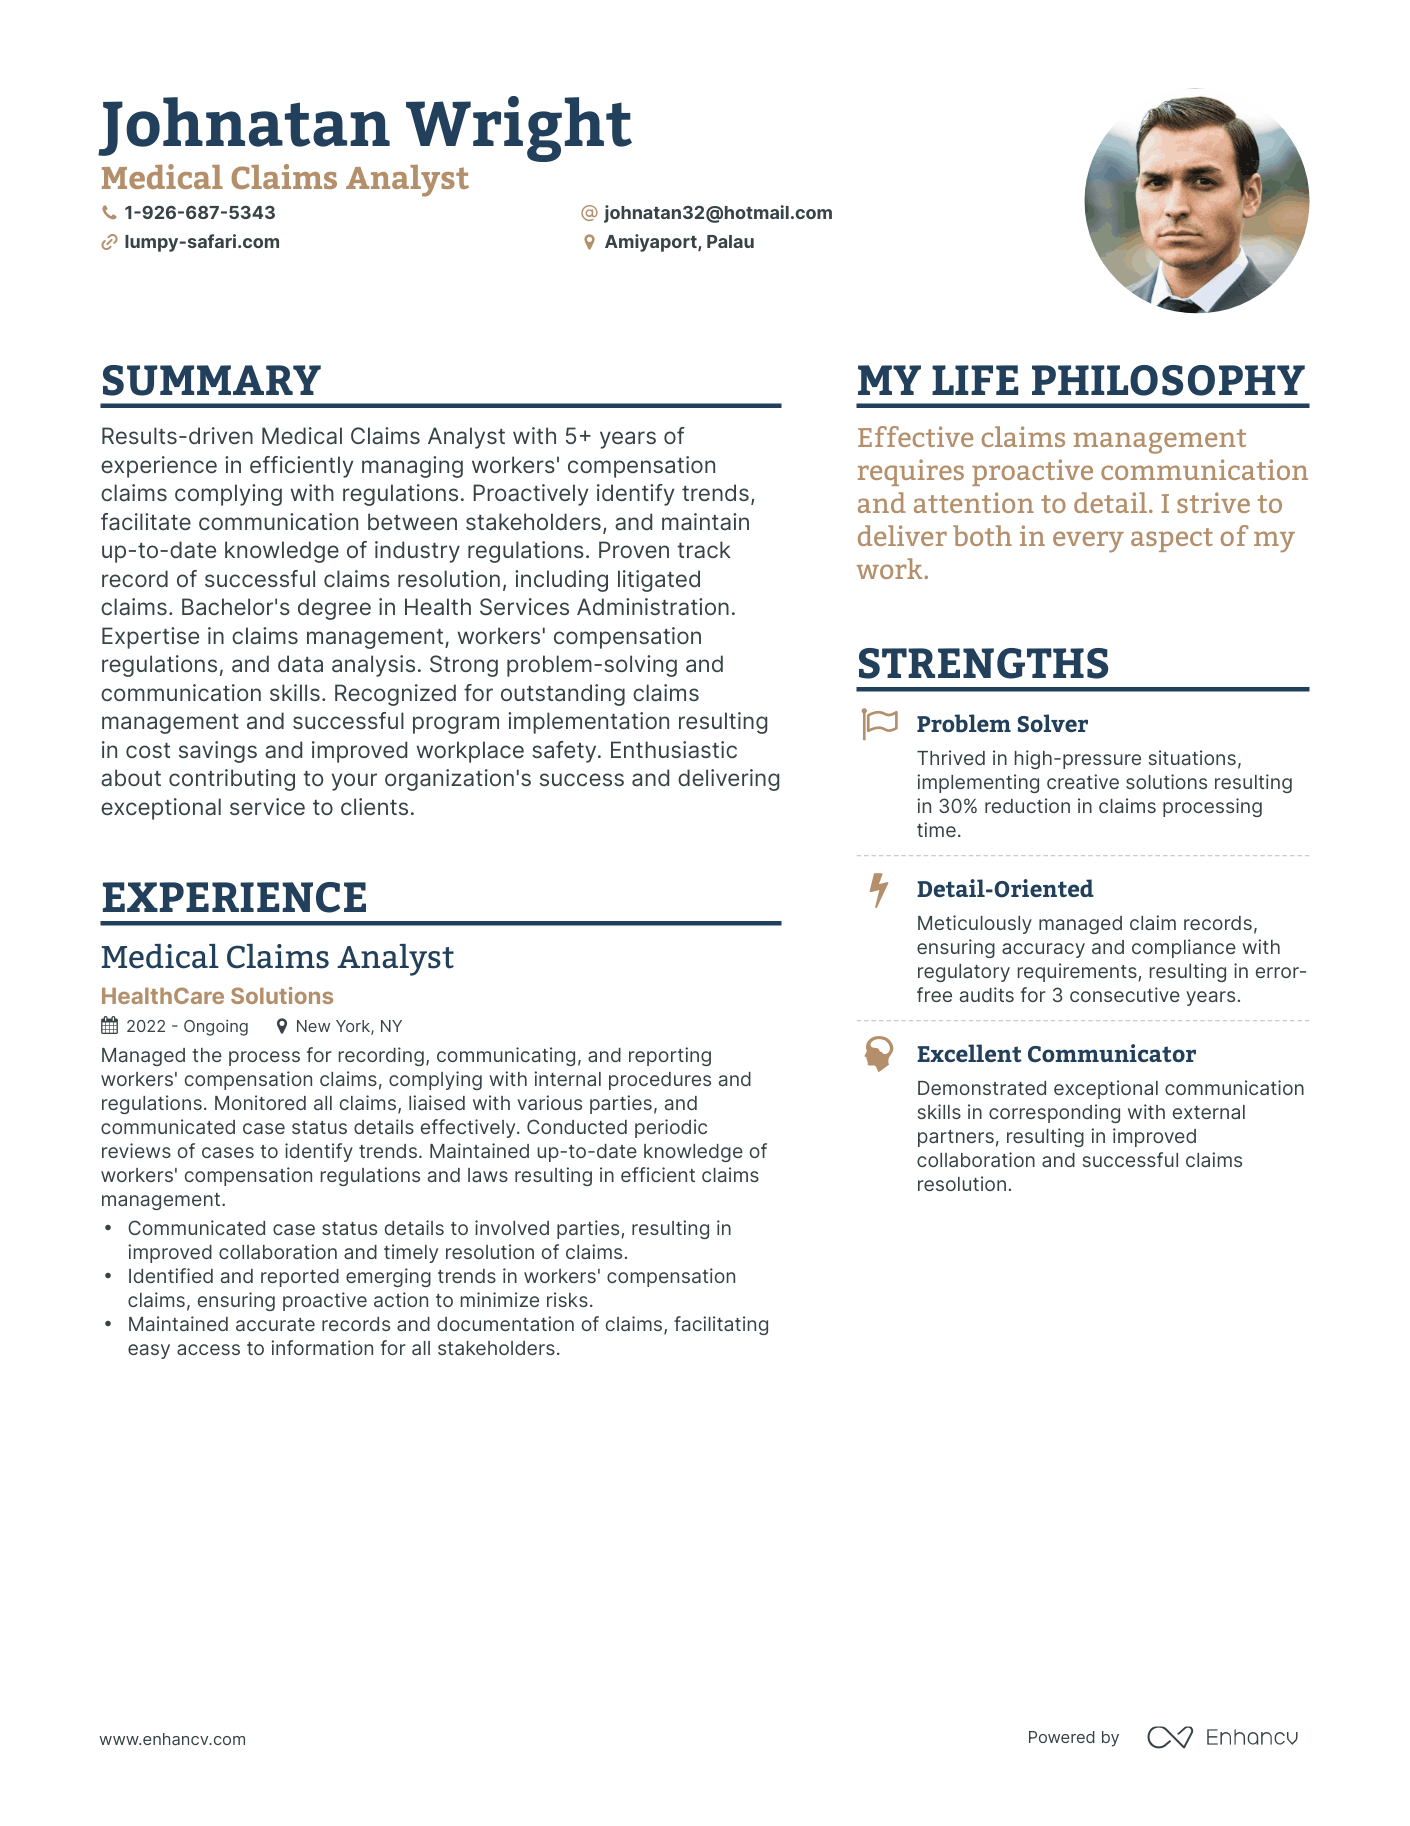 Medical Claims Analyst resume example